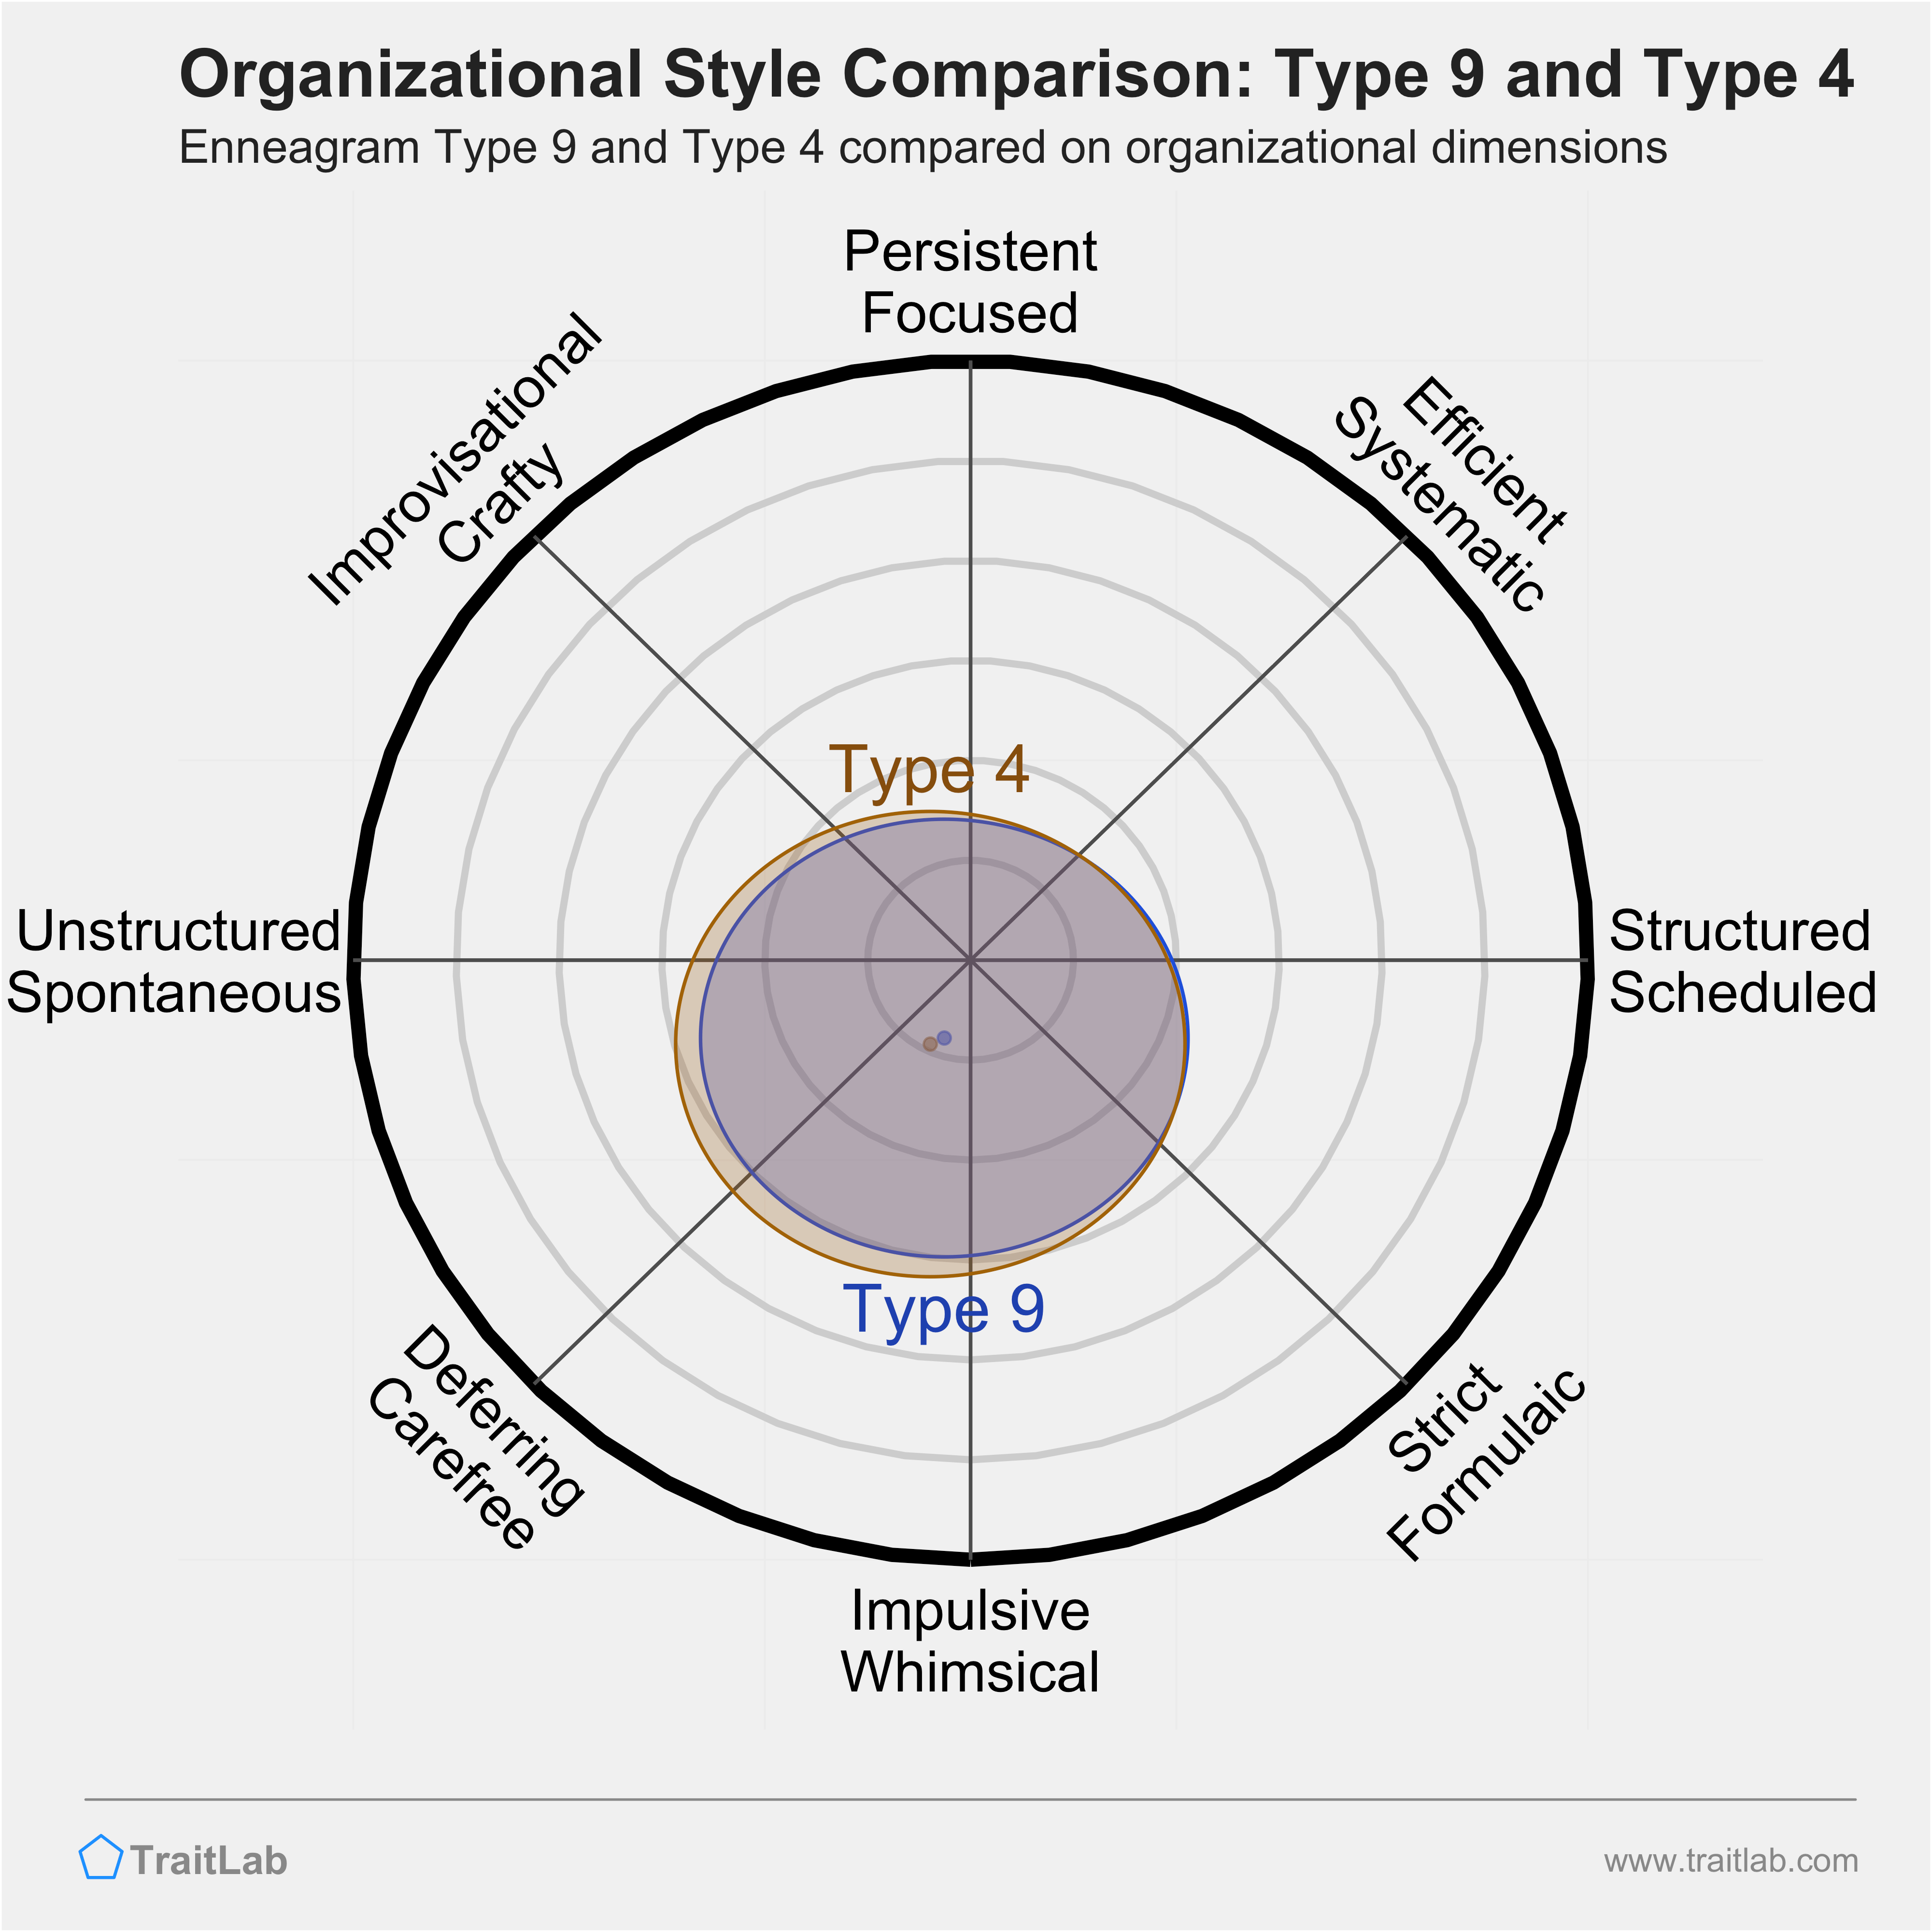 Type 9 and Type 4 comparison across organizational dimensions